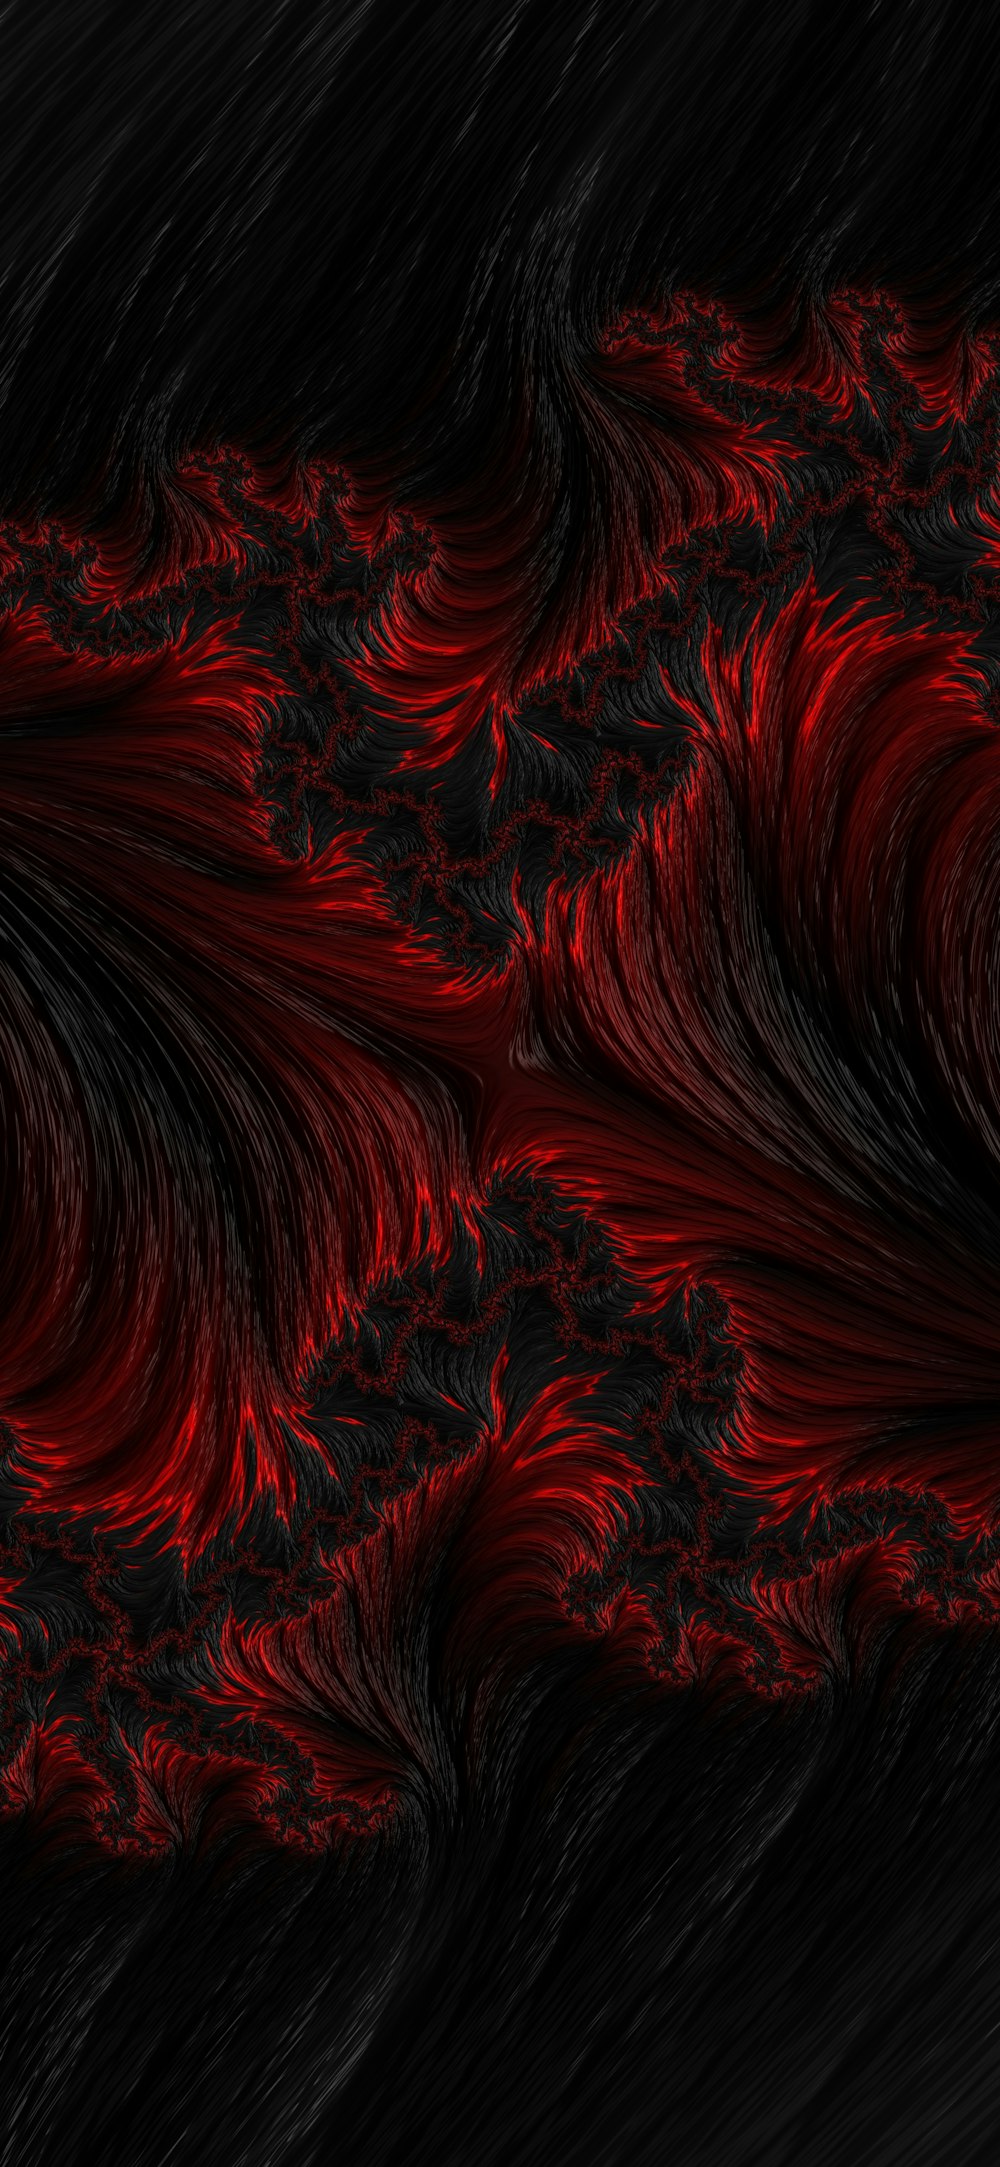 red and black backgrounds for photoshop